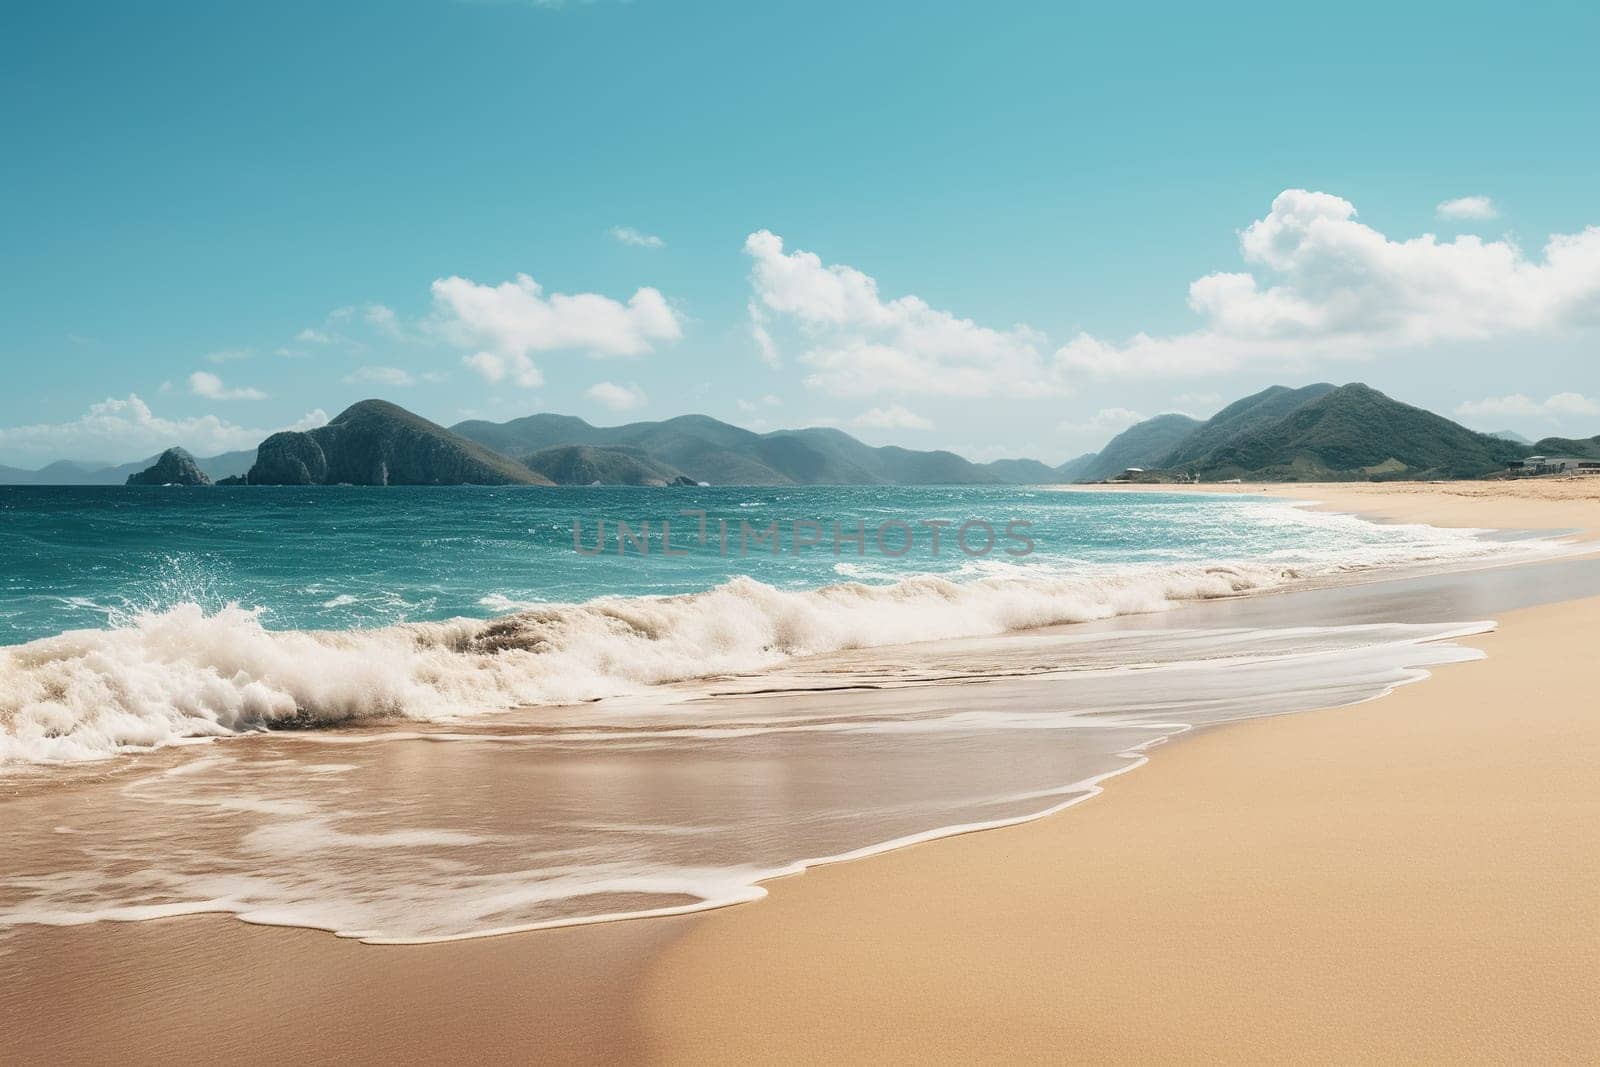 Seascape with empty beach, mountains and beautiful blue water. Vacation, travel, beach holiday concept.